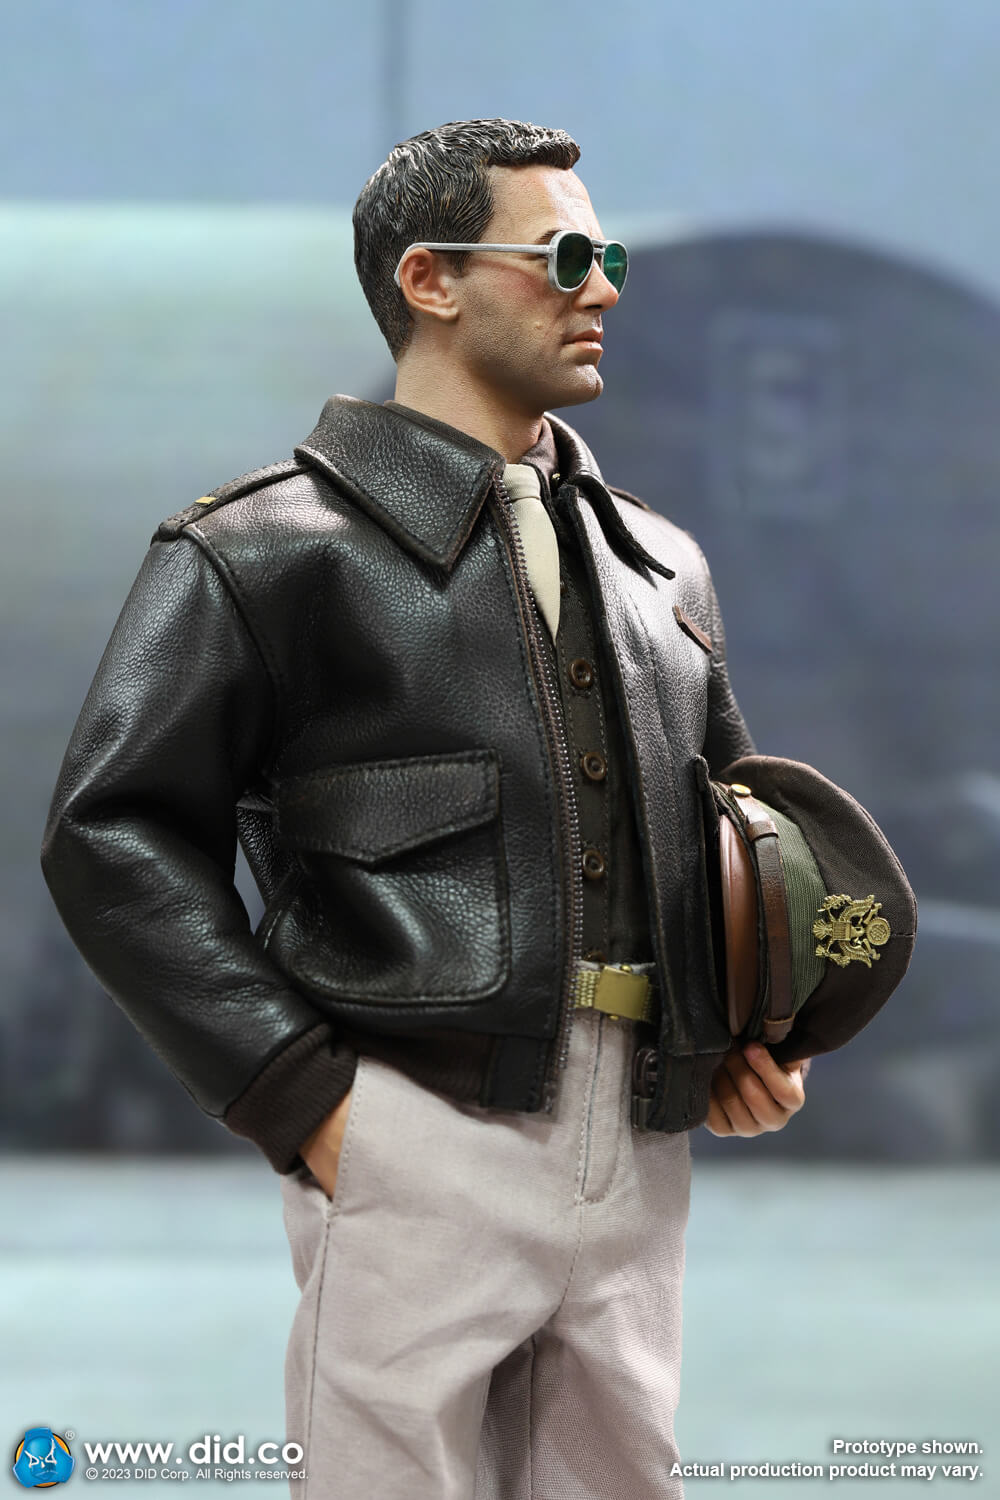 military - NEW PRODUCT: DiD: A80167 WWII United States Army Air Forces Pilot – Captain Rafe 2720